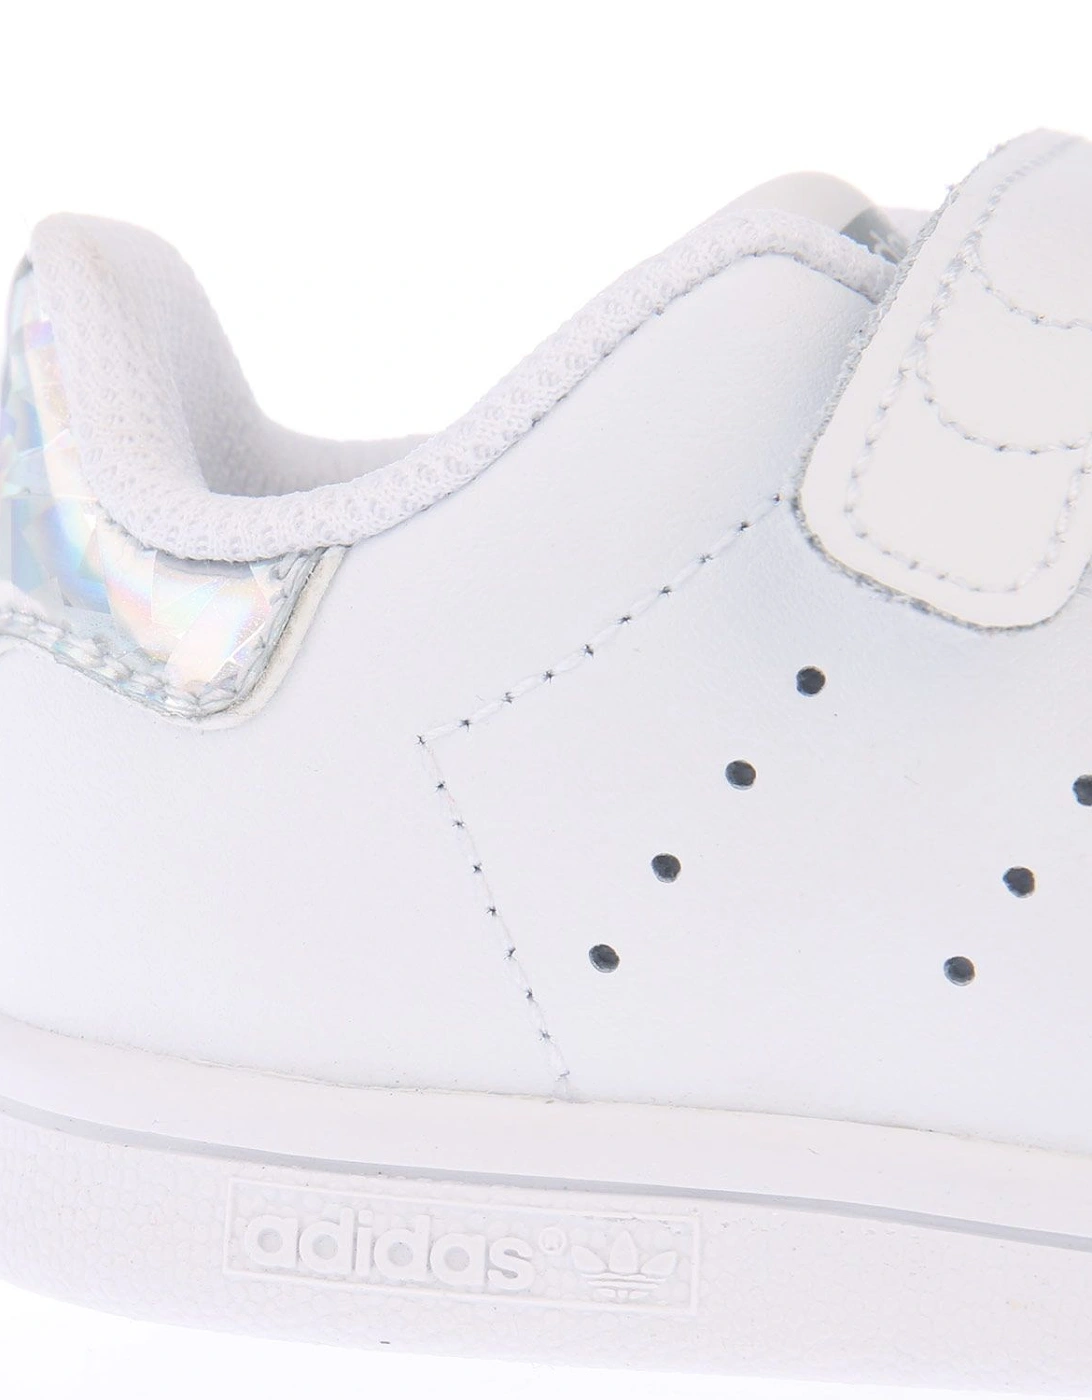 Infant Stan Smith Trainers